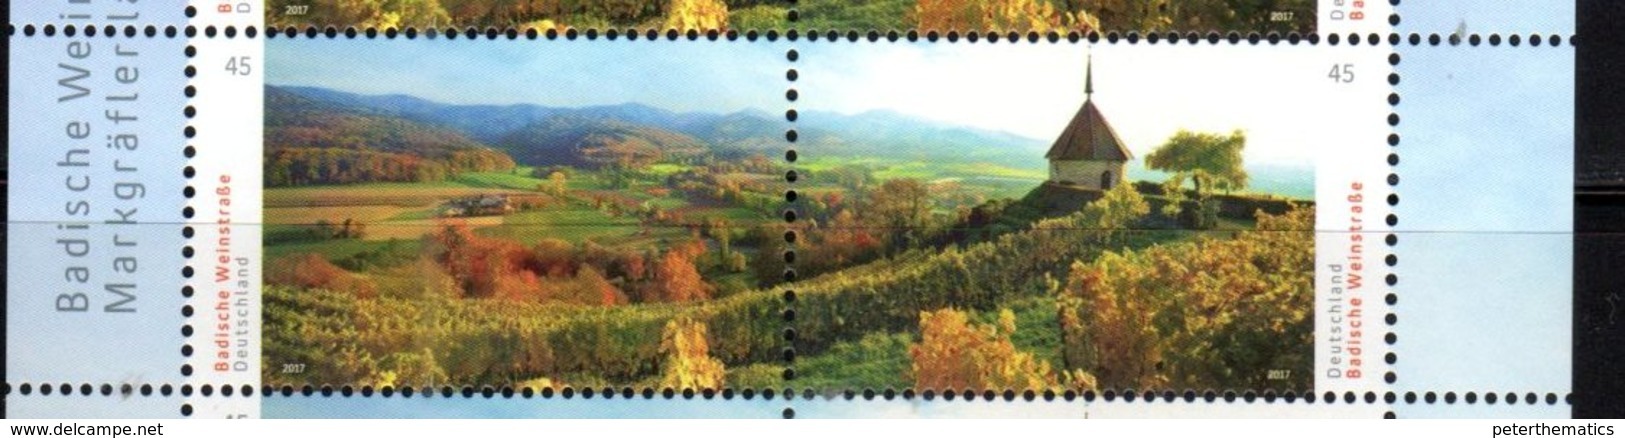 GERMANY, 2017, MNH, BEAUTIFUL GERMANY,WINE COUNTRY, VINES,  VIEWS,2v - Geography